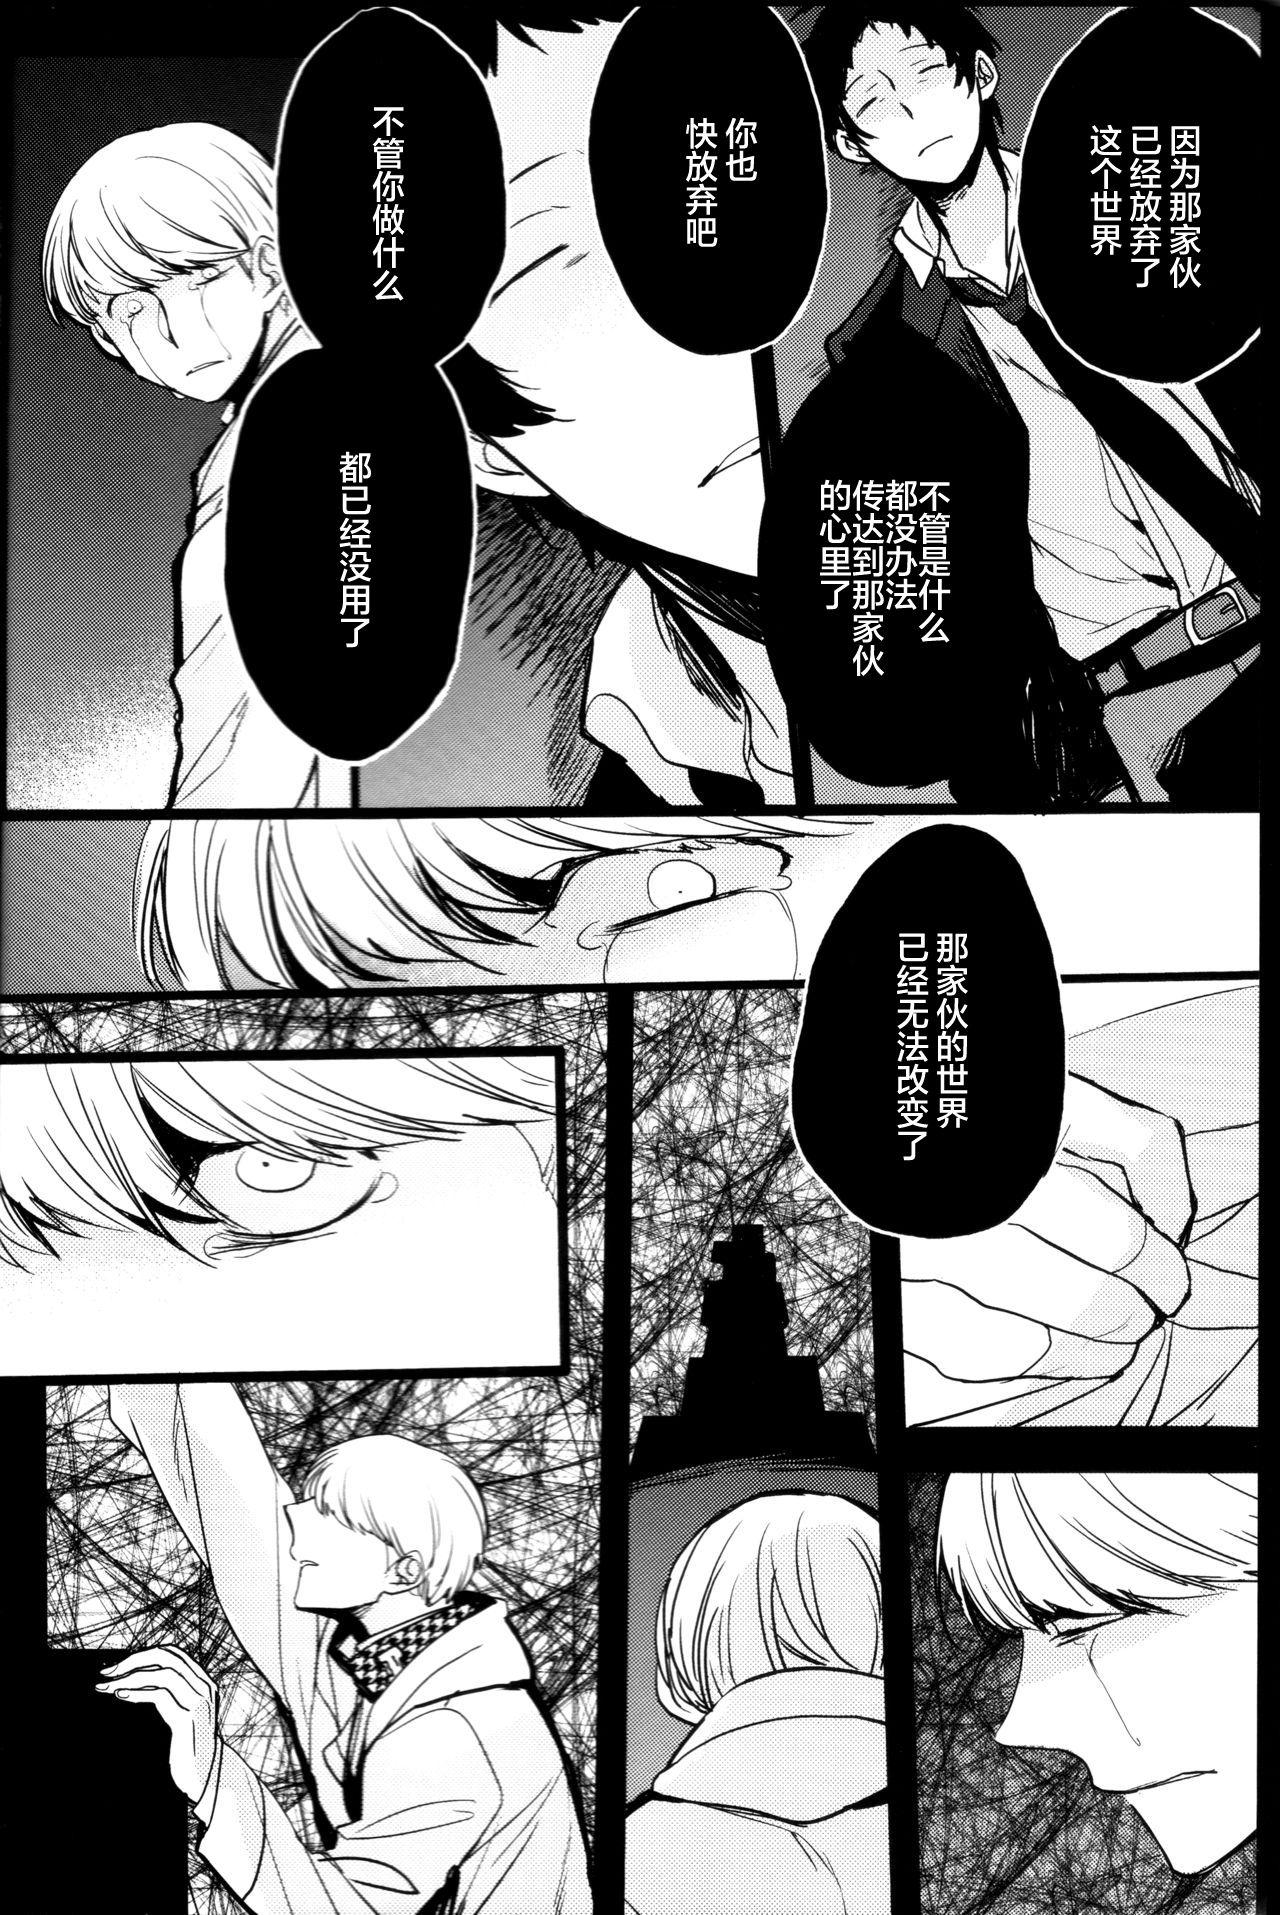 Gay Public The End Of The World Volume 3 - Persona 4 Boys - Page 8